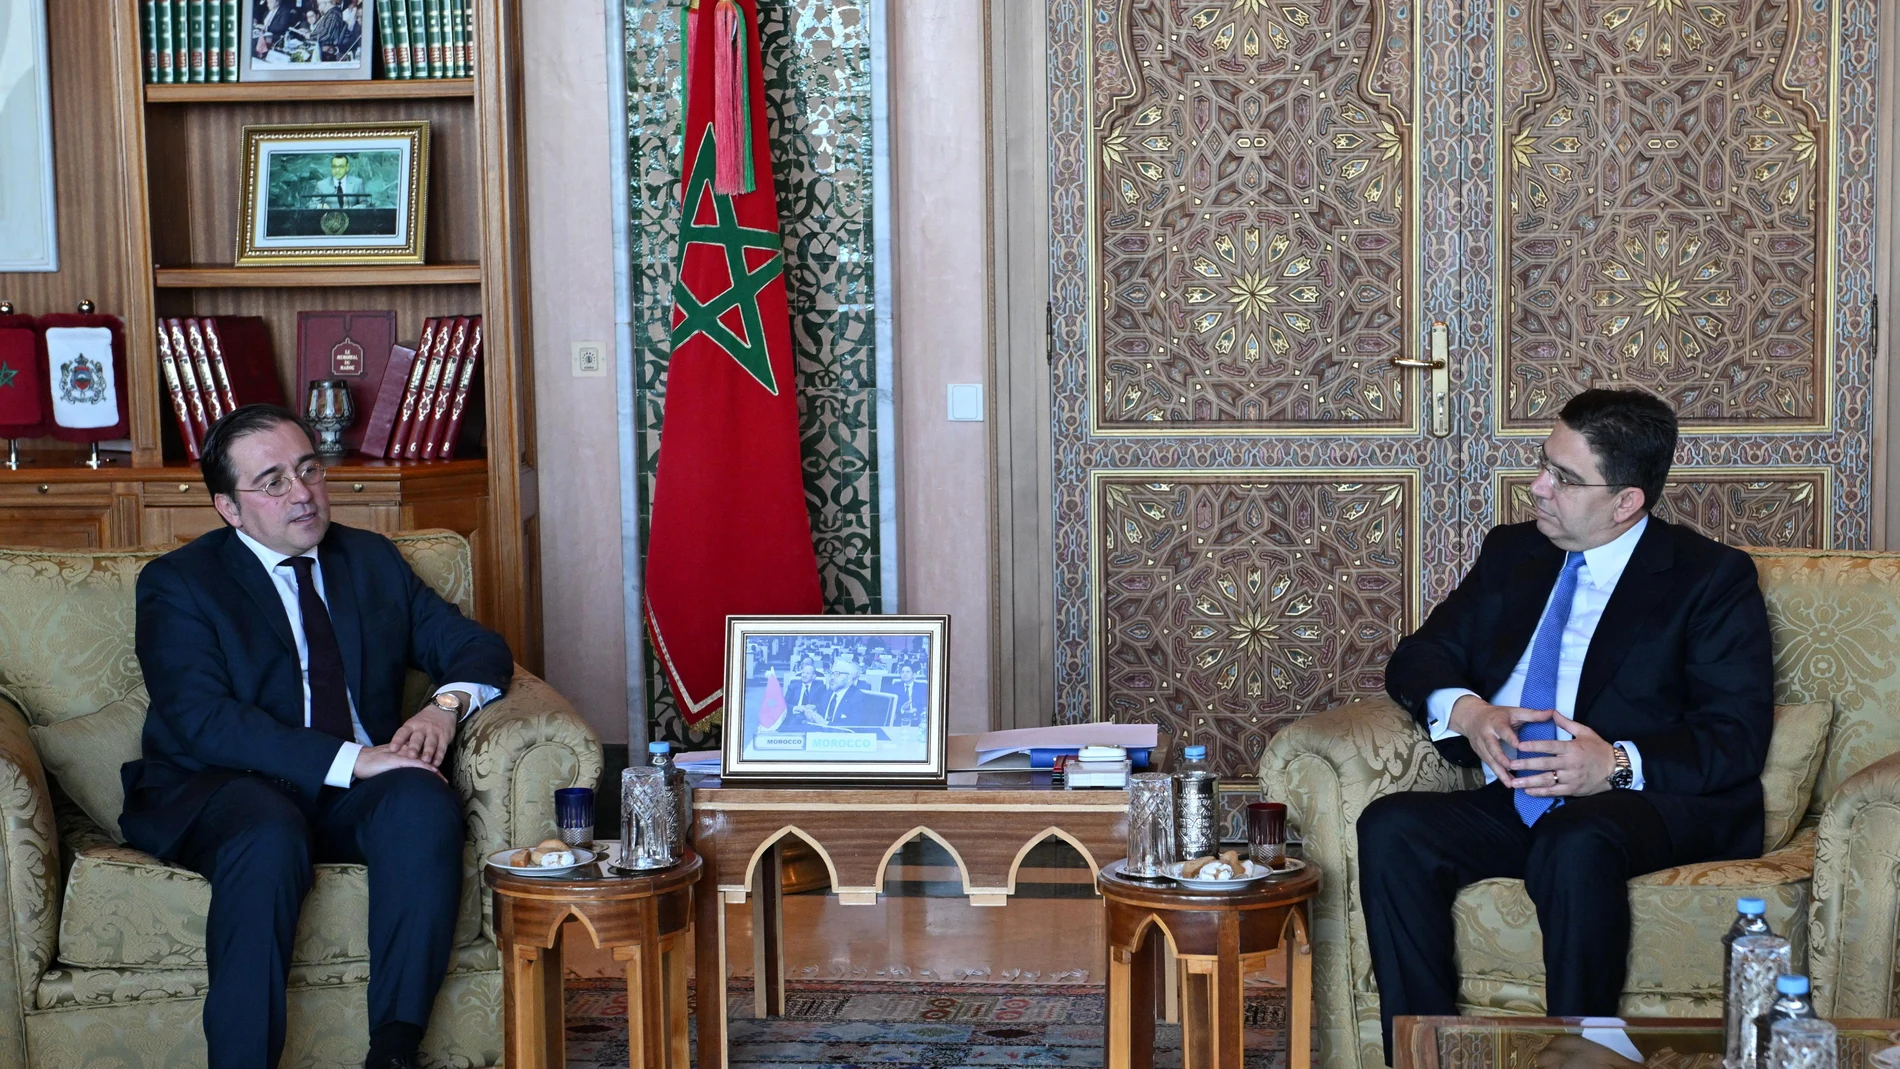 Spanish Foreign Minister Jose Manuel Albares (L) attends a meeting with Morocco's Foreign Minister Nasser Bourita (R) at the Foreign Ministry building in Rabat, Morocco.